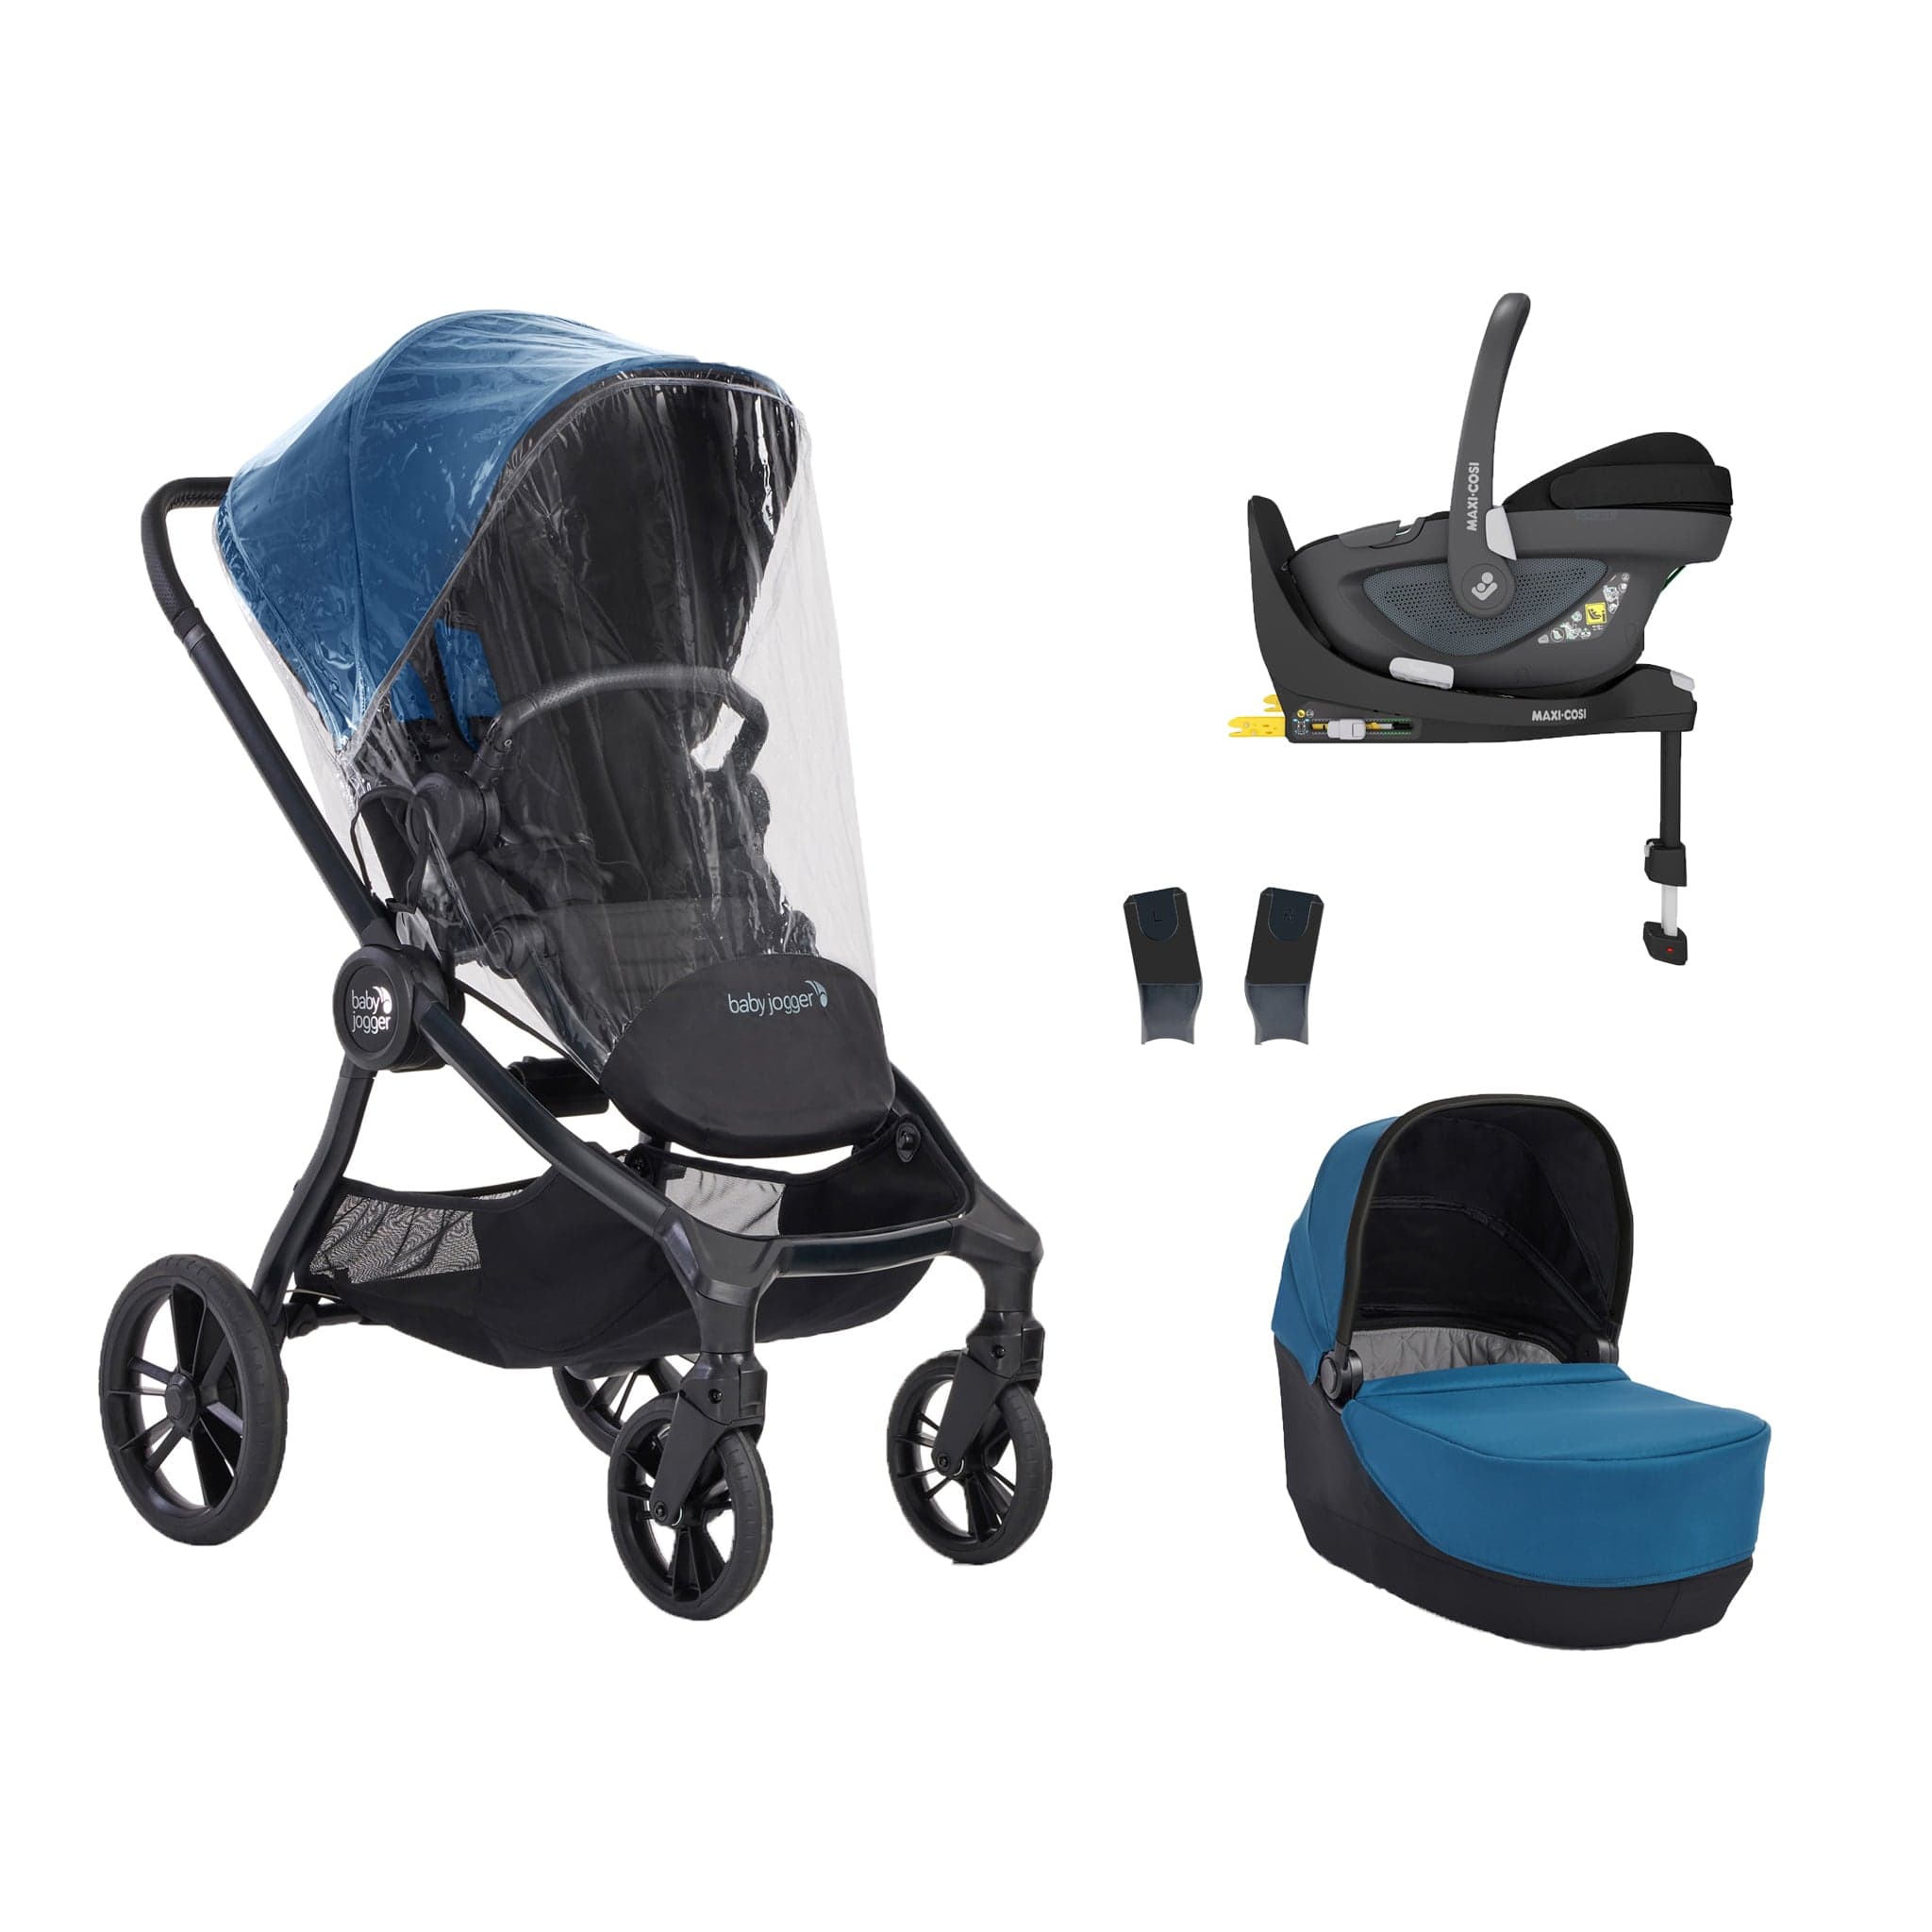 Baby Jogger City Sights Maxi-Cosi Bundle in Deep Teal Travel Systems CIT-TEL-11826-PEB 0047406183692